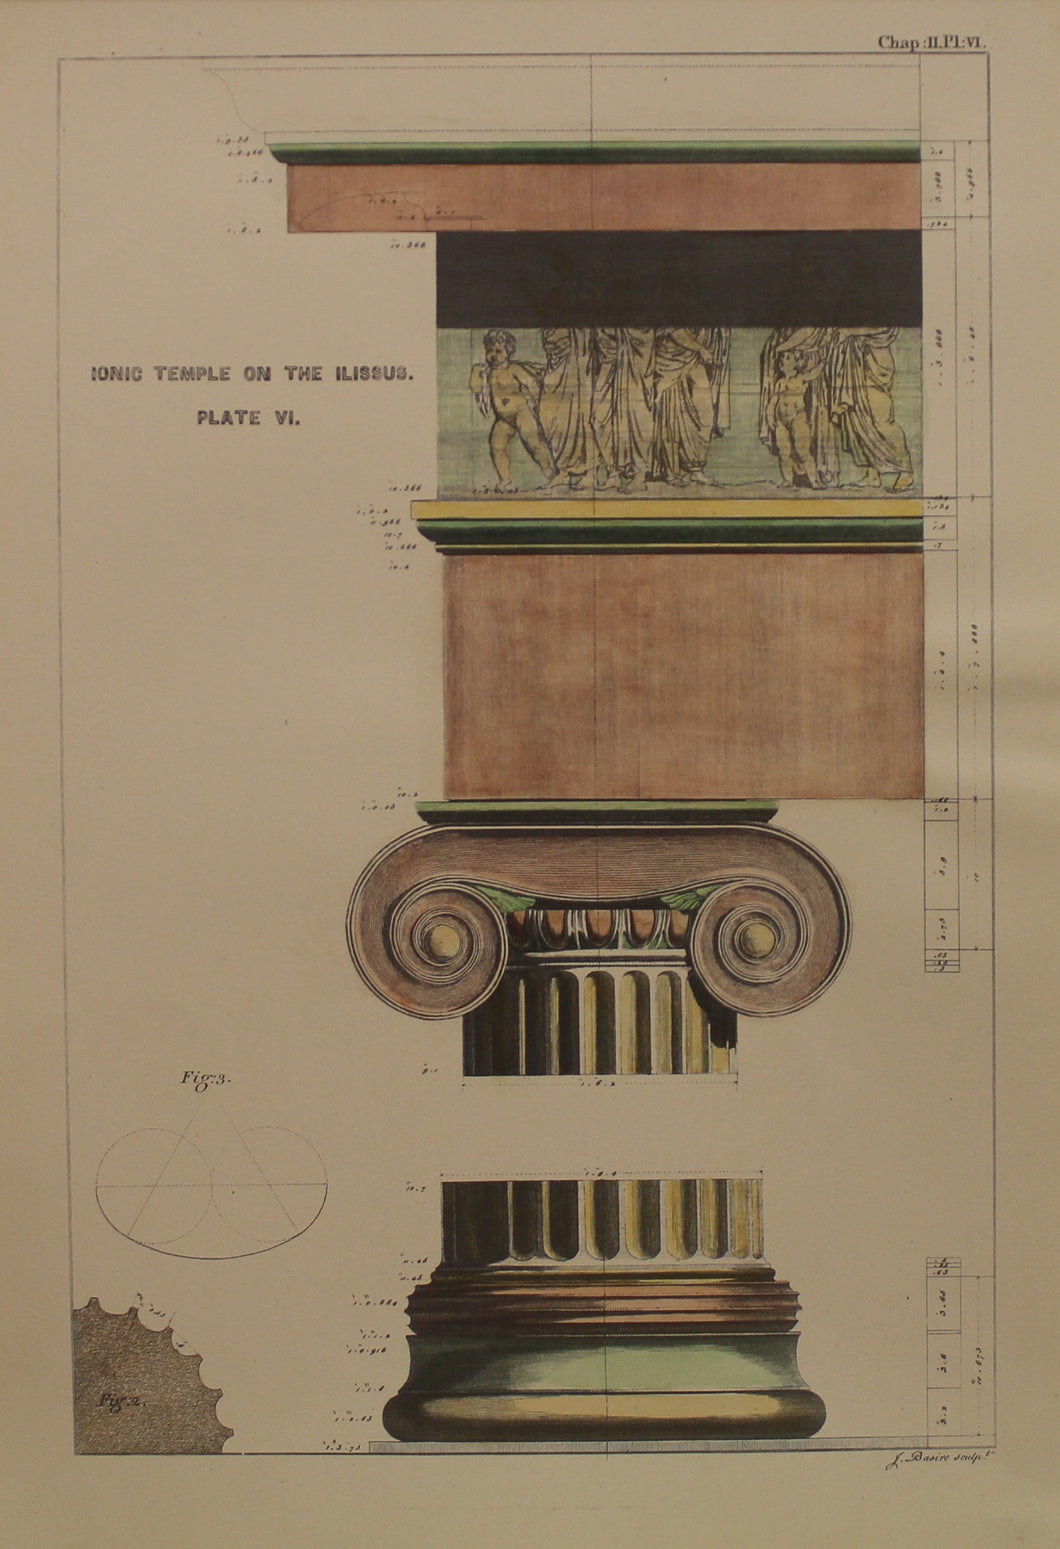 Architecture, Basire J, Ionic Temple of the Ilissus, Plate VI, c1770, Hand Coloured Reproduction